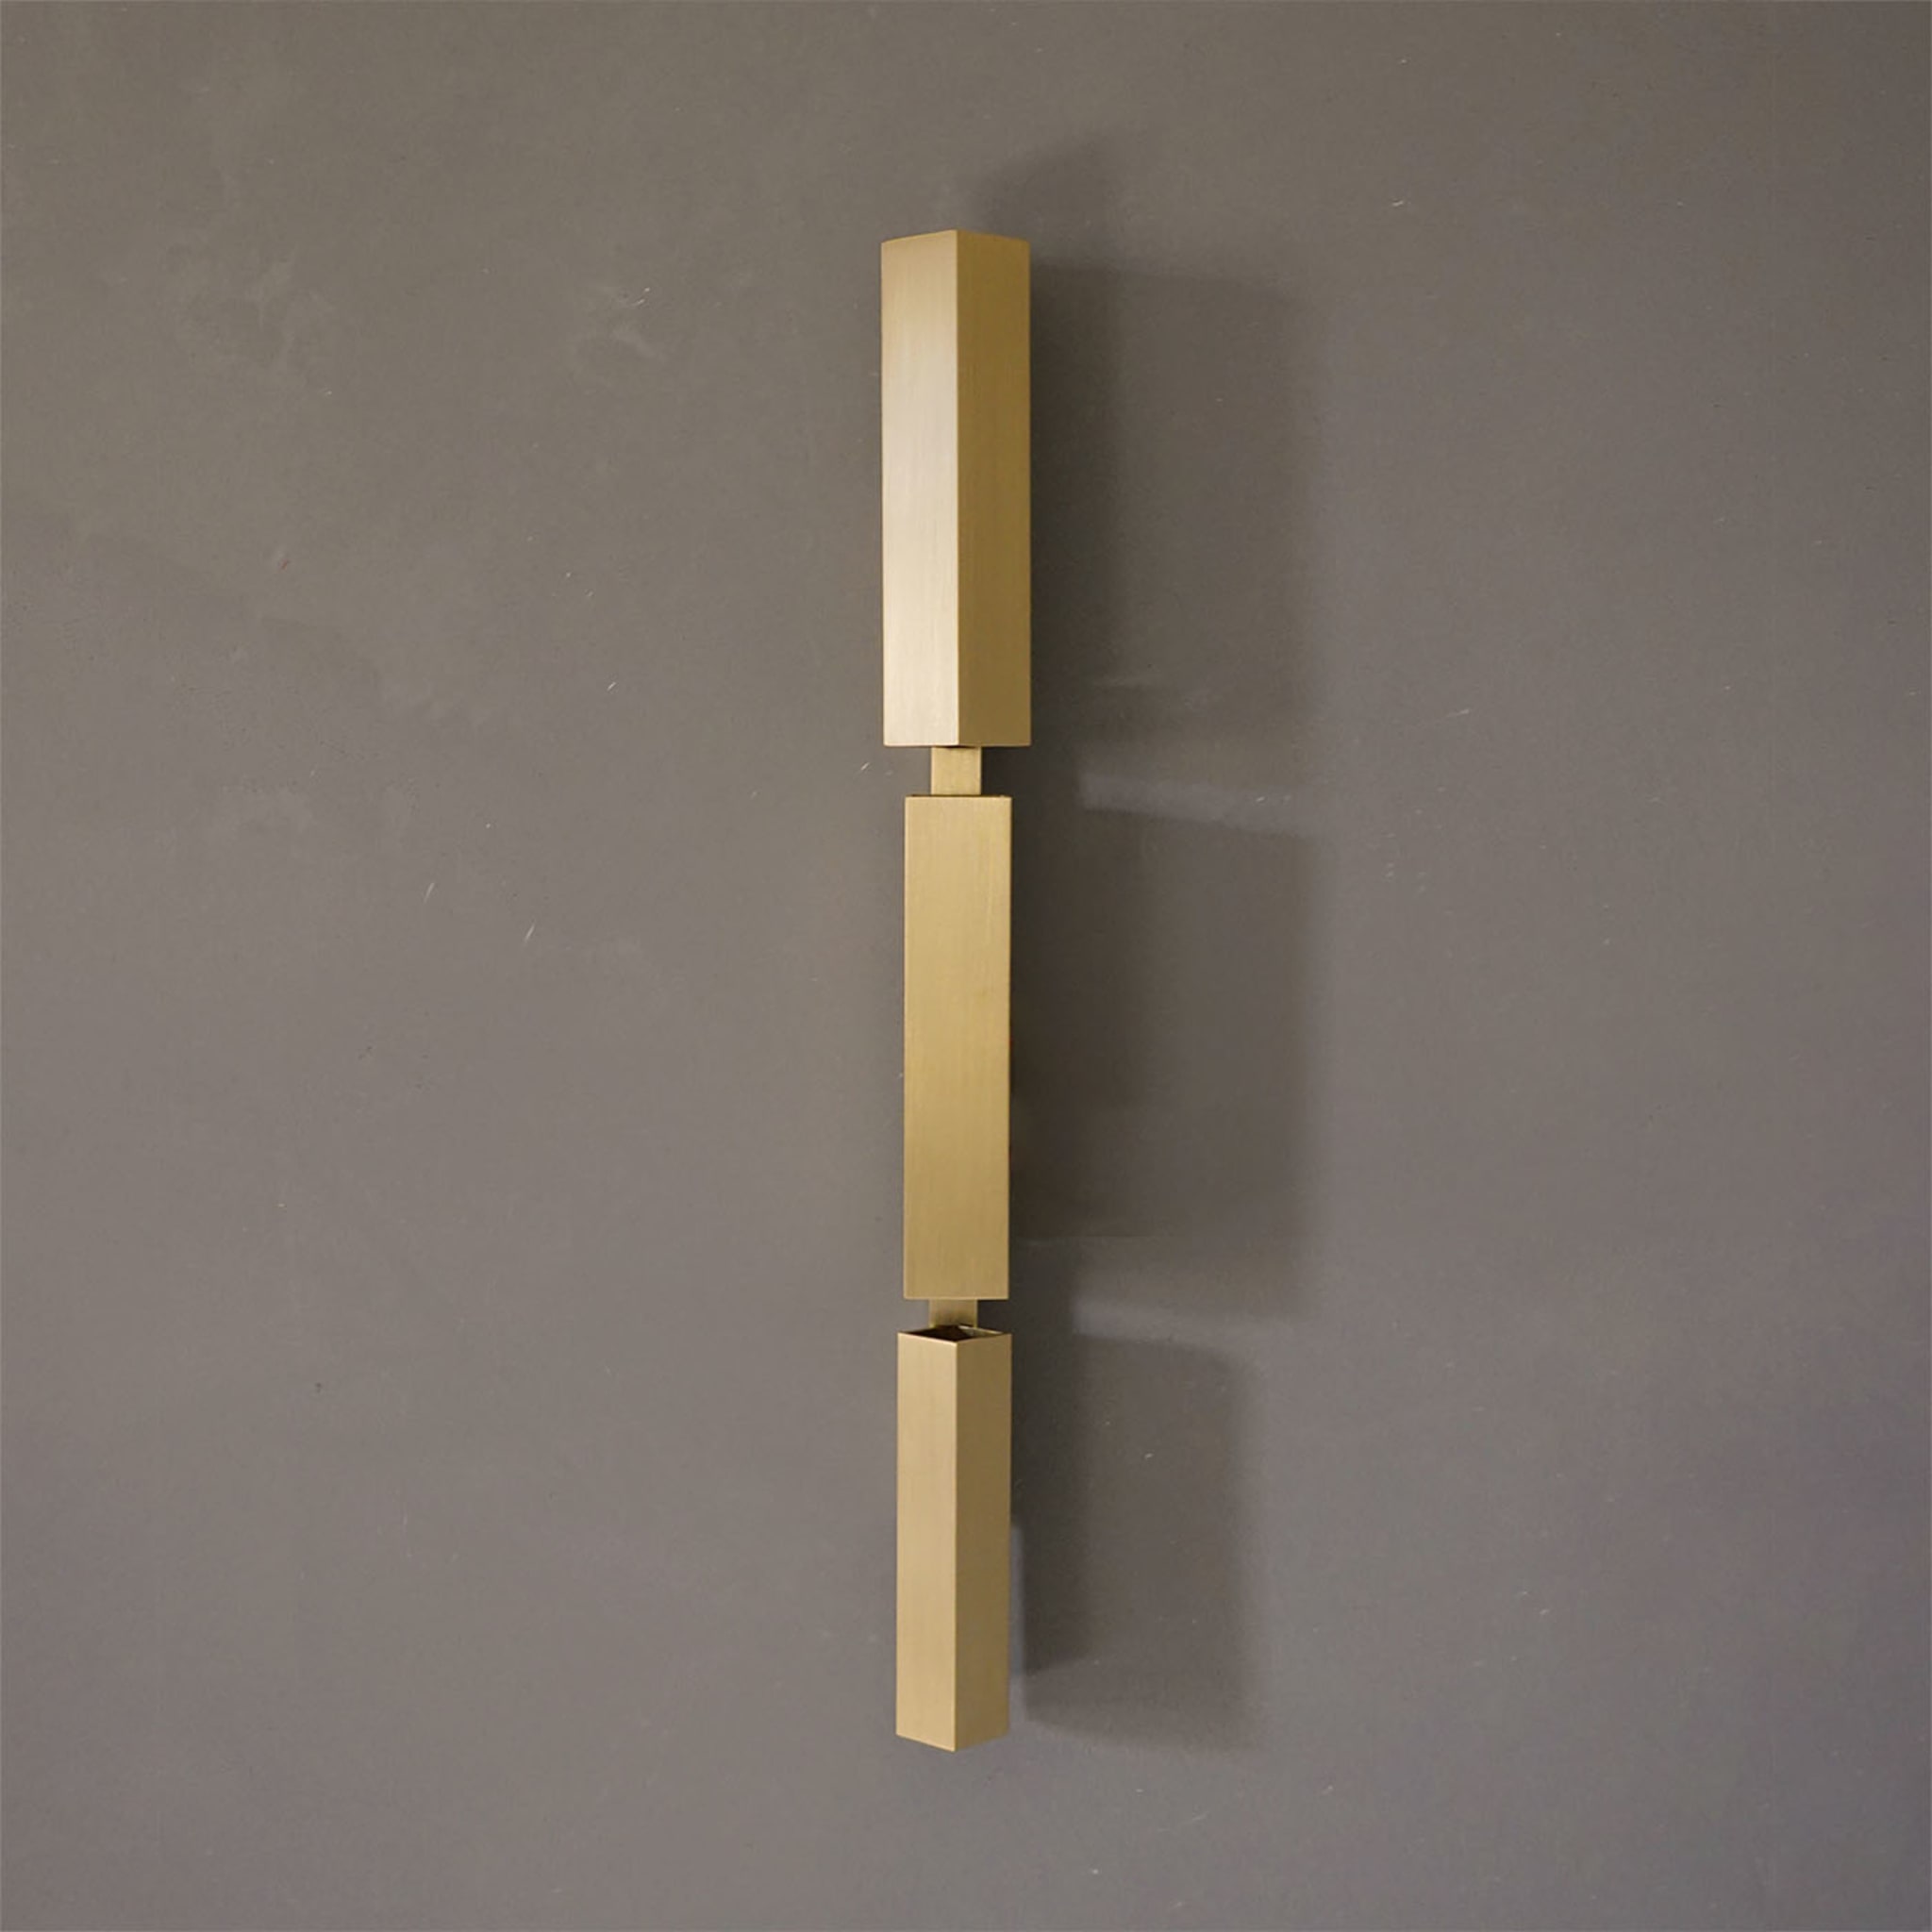 Tetra Twin Wall Sconce Solid Brass - Alternative view 1